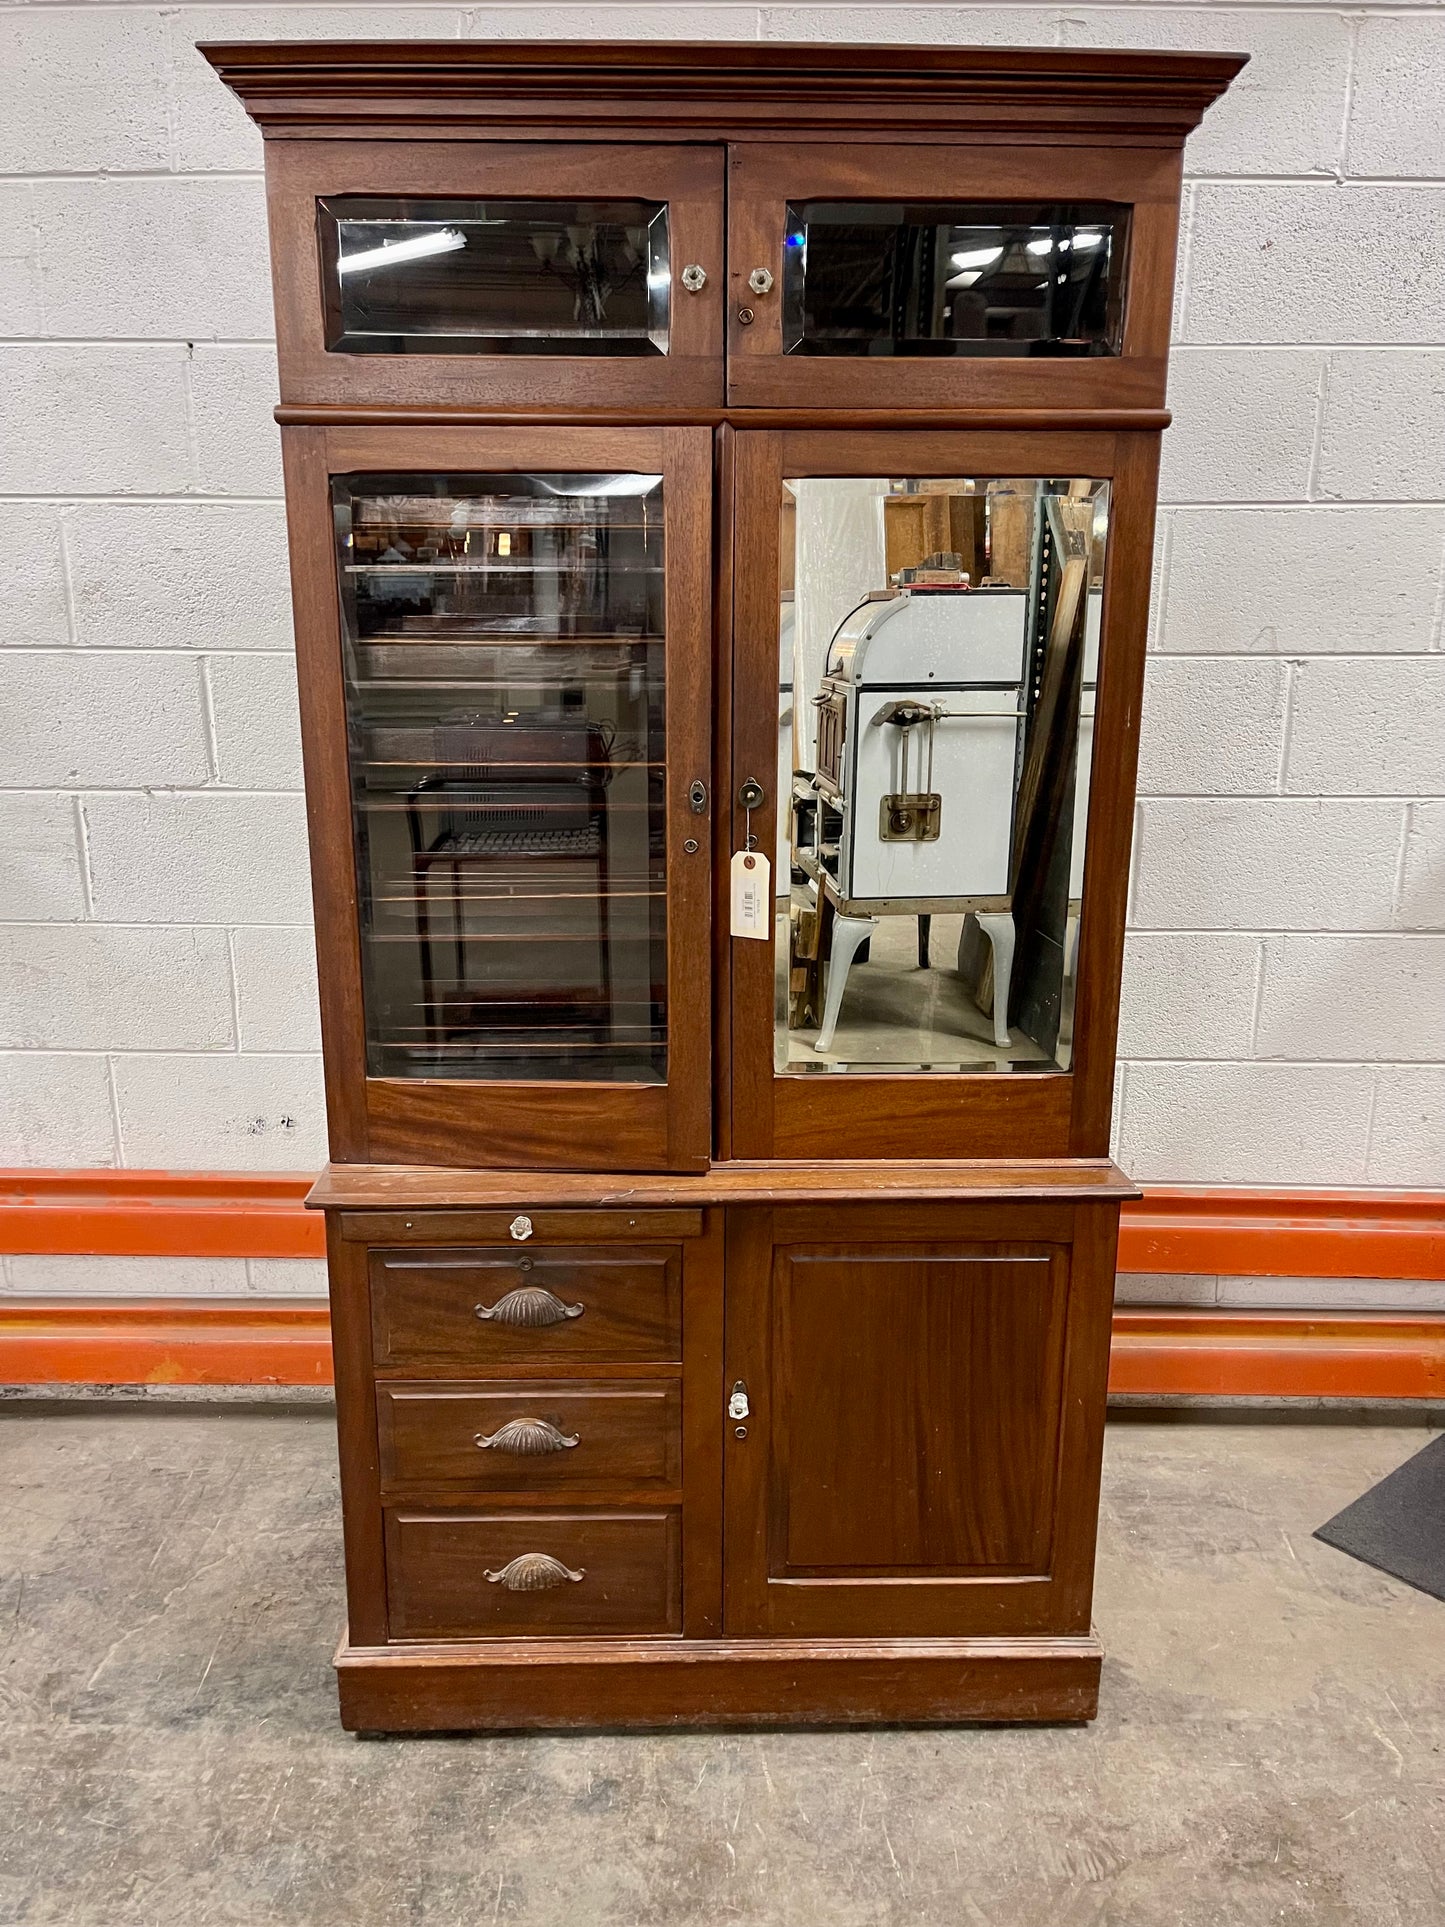 Early 1900s Physicians Medical Cabinet